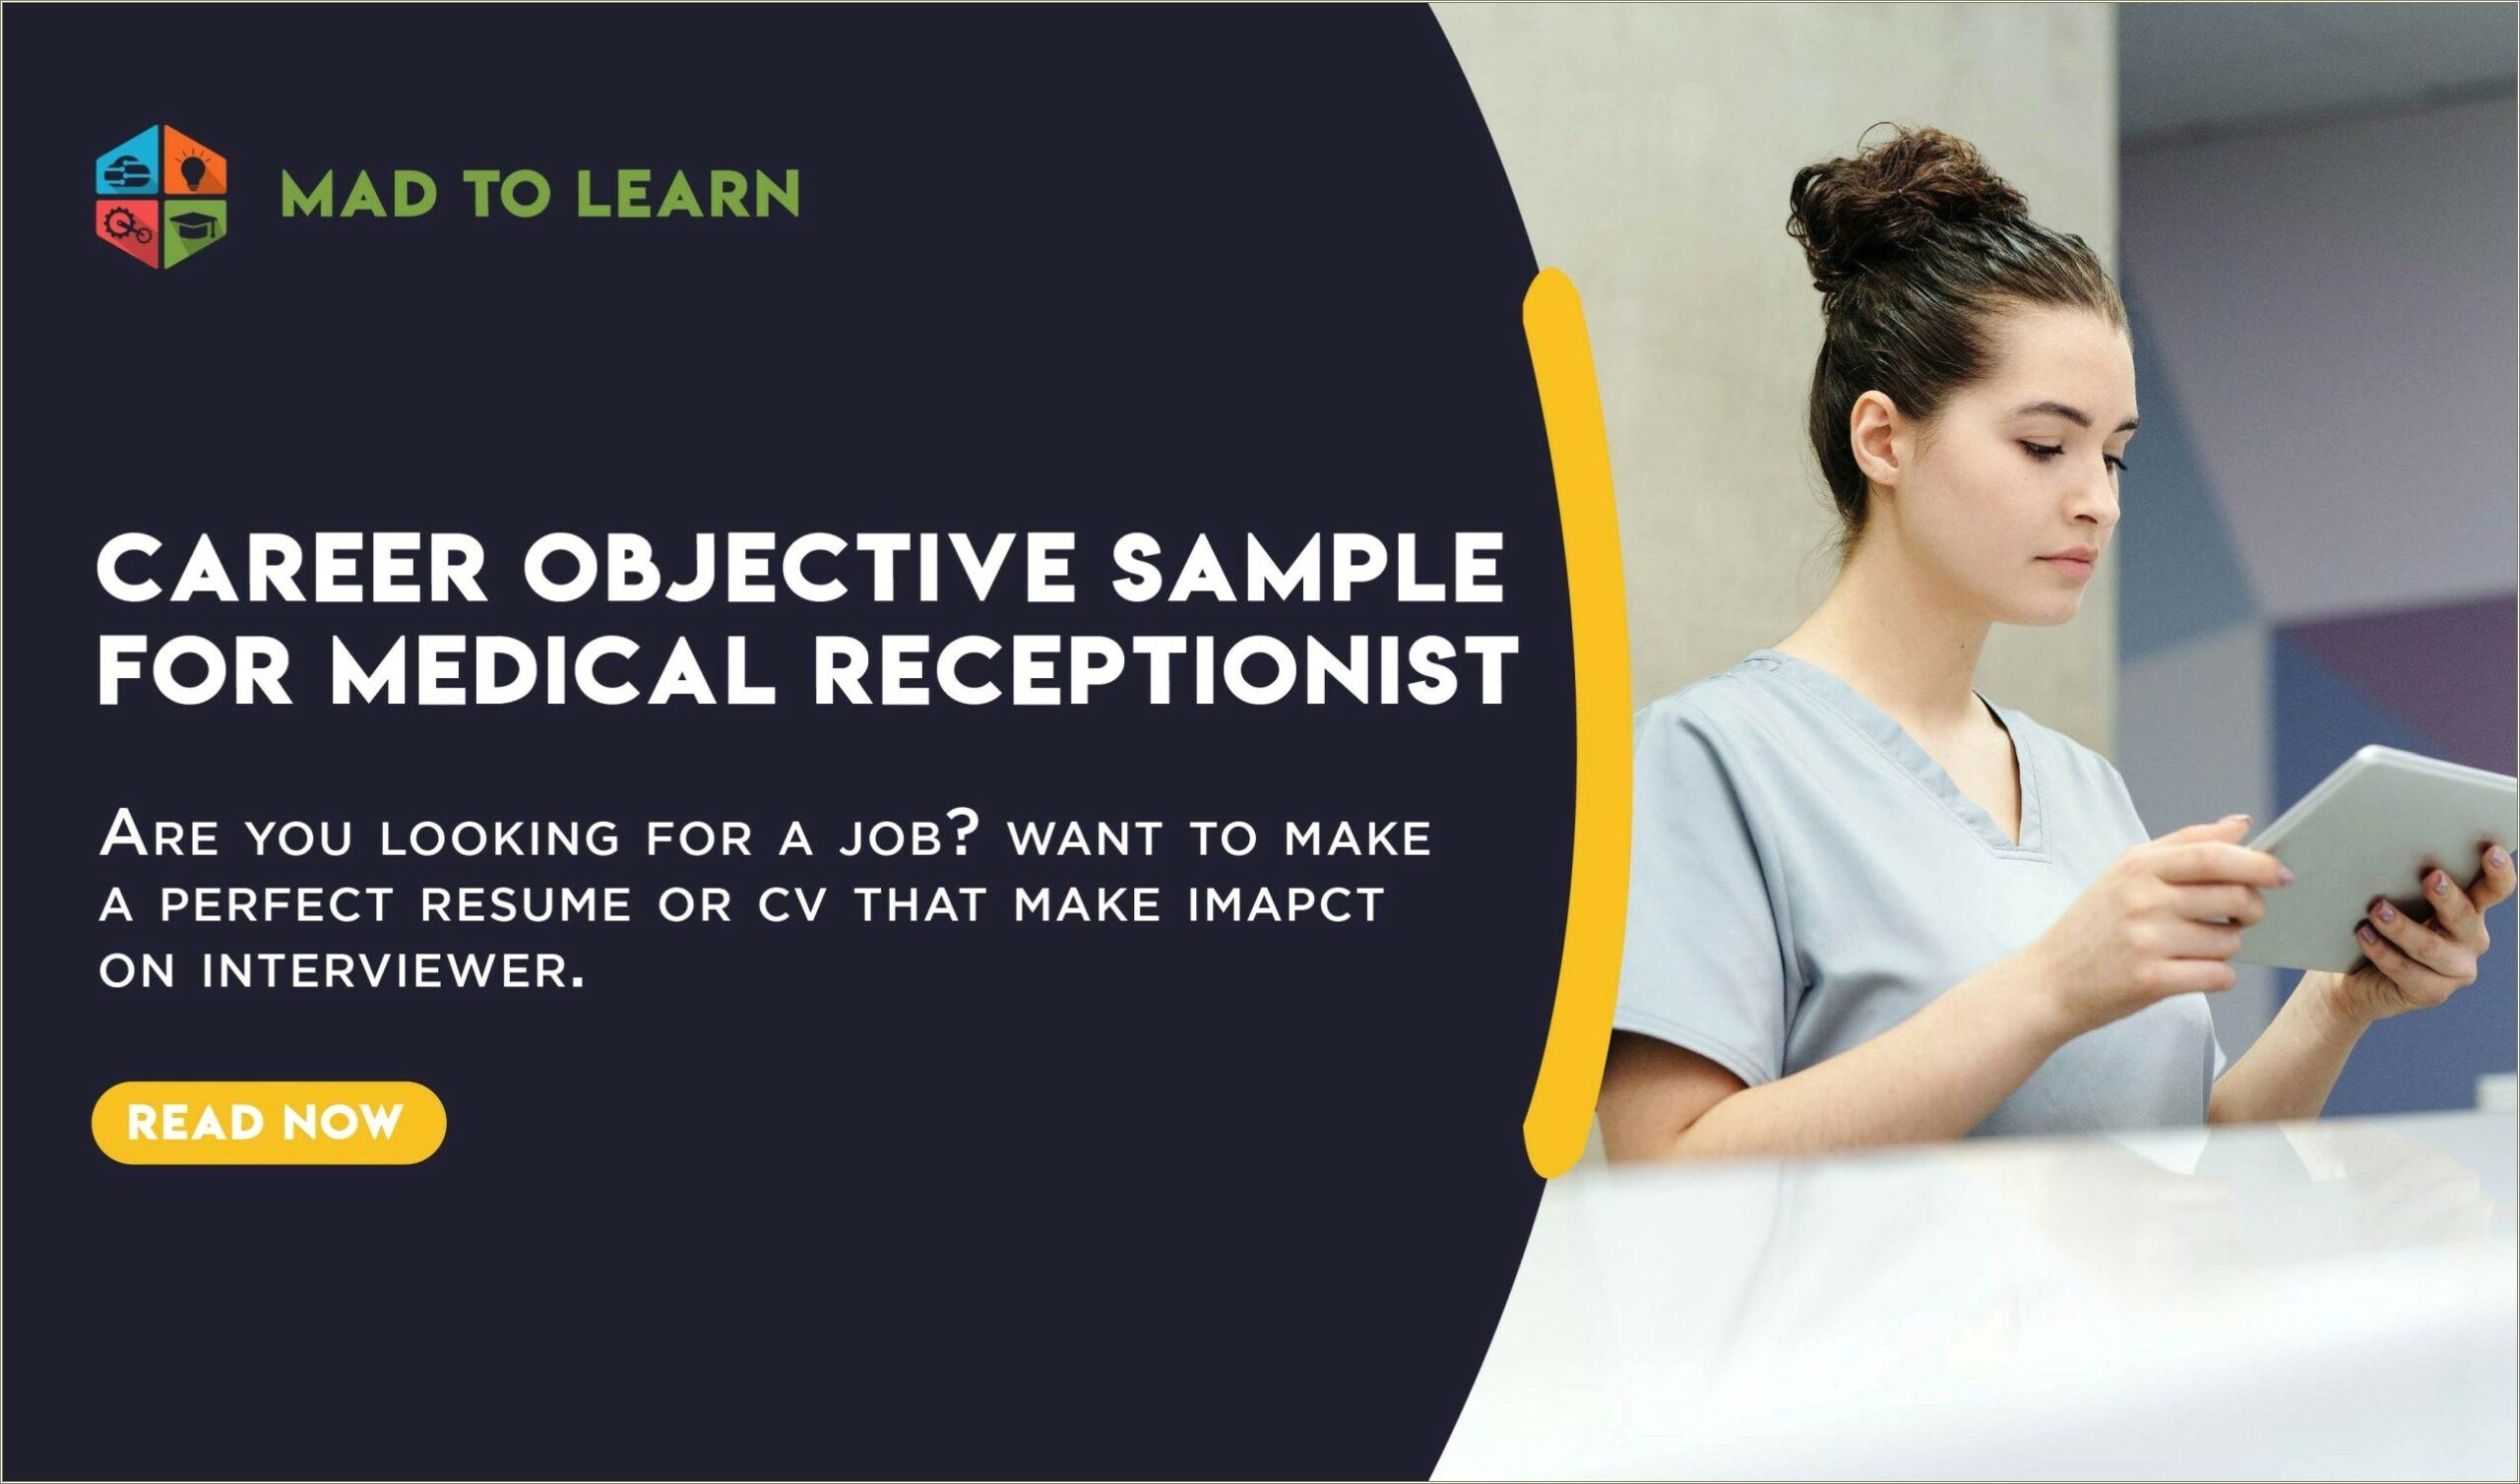 Examples Of Resumes For A Medical Receptionist